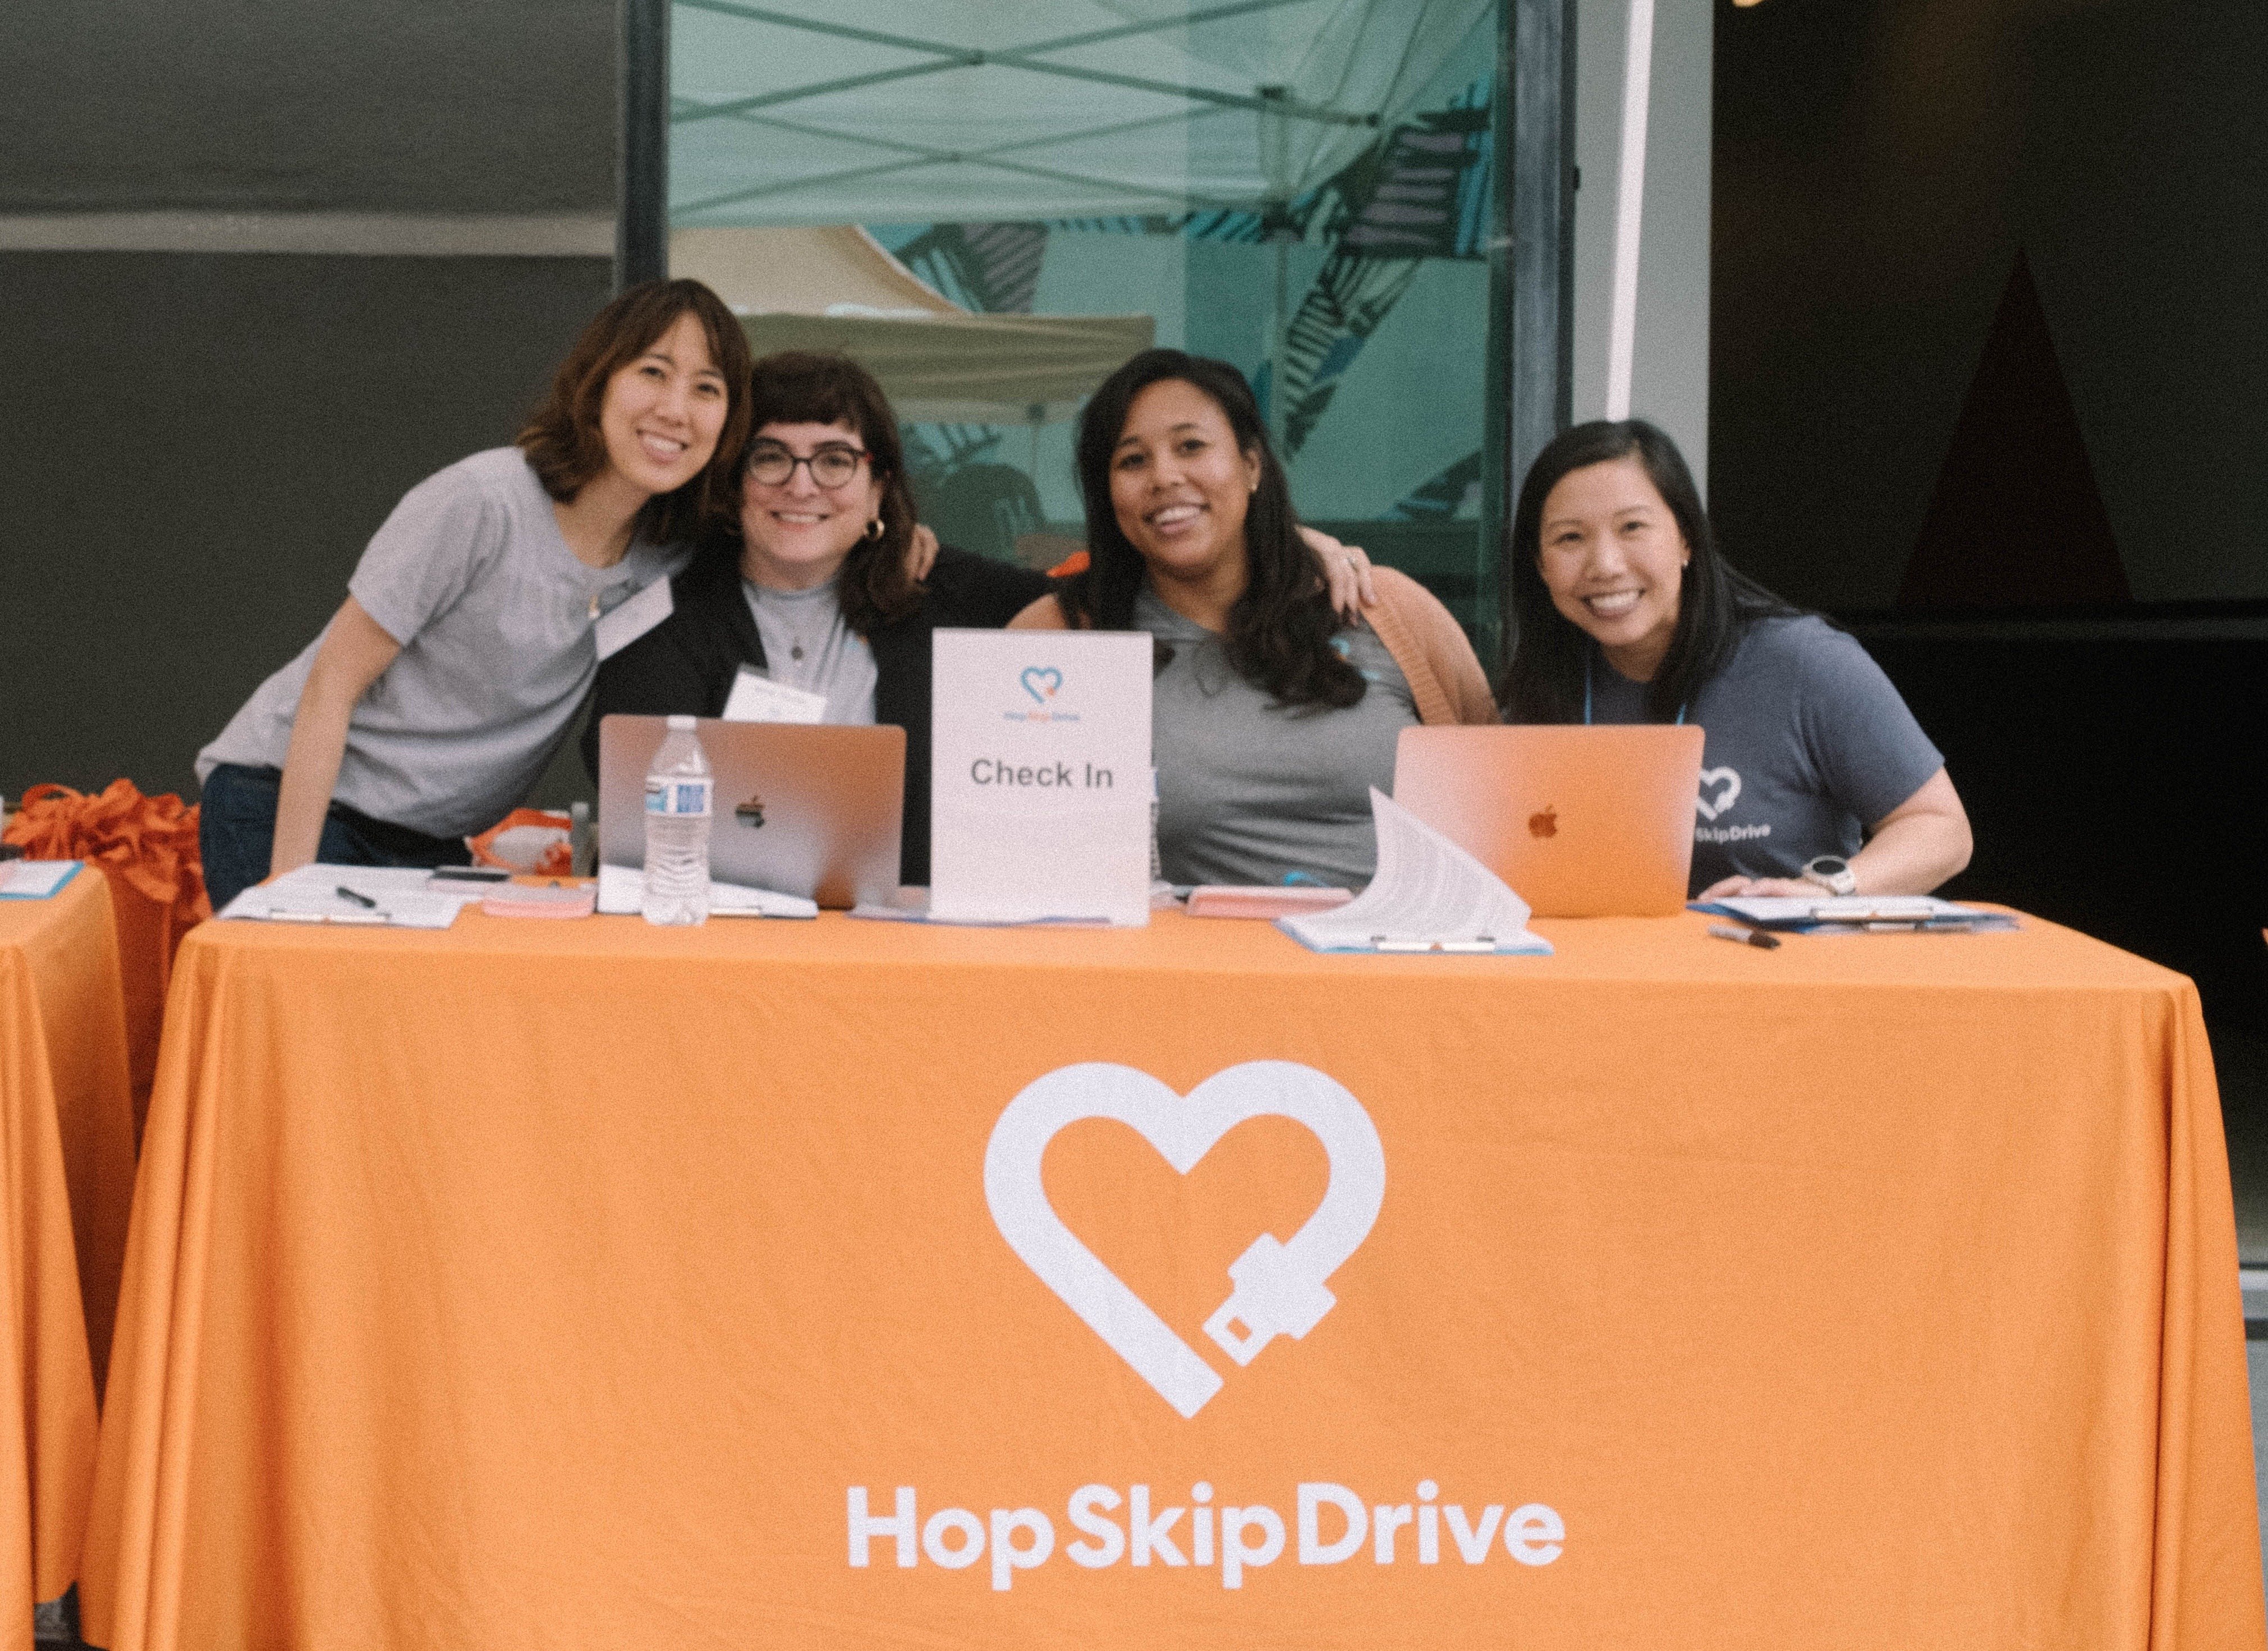 HopSkipDrive supports CareDriver community with events and resources